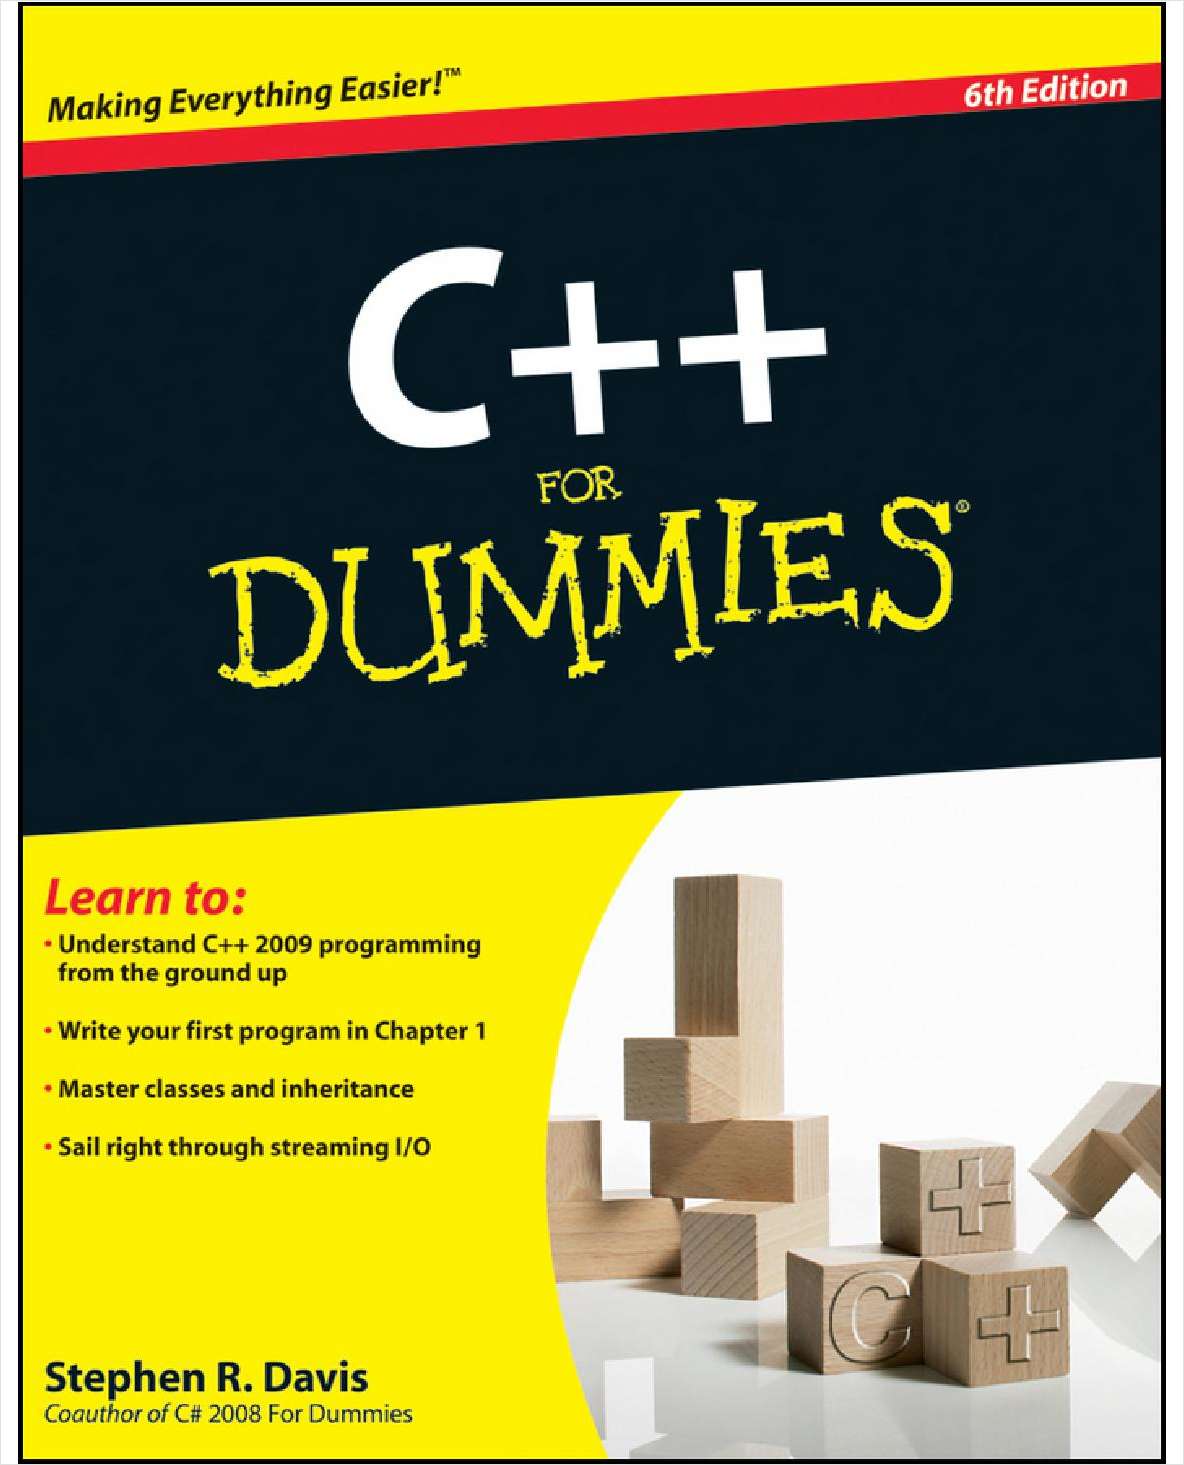 C++ For Dummies--Free Sample Chapters